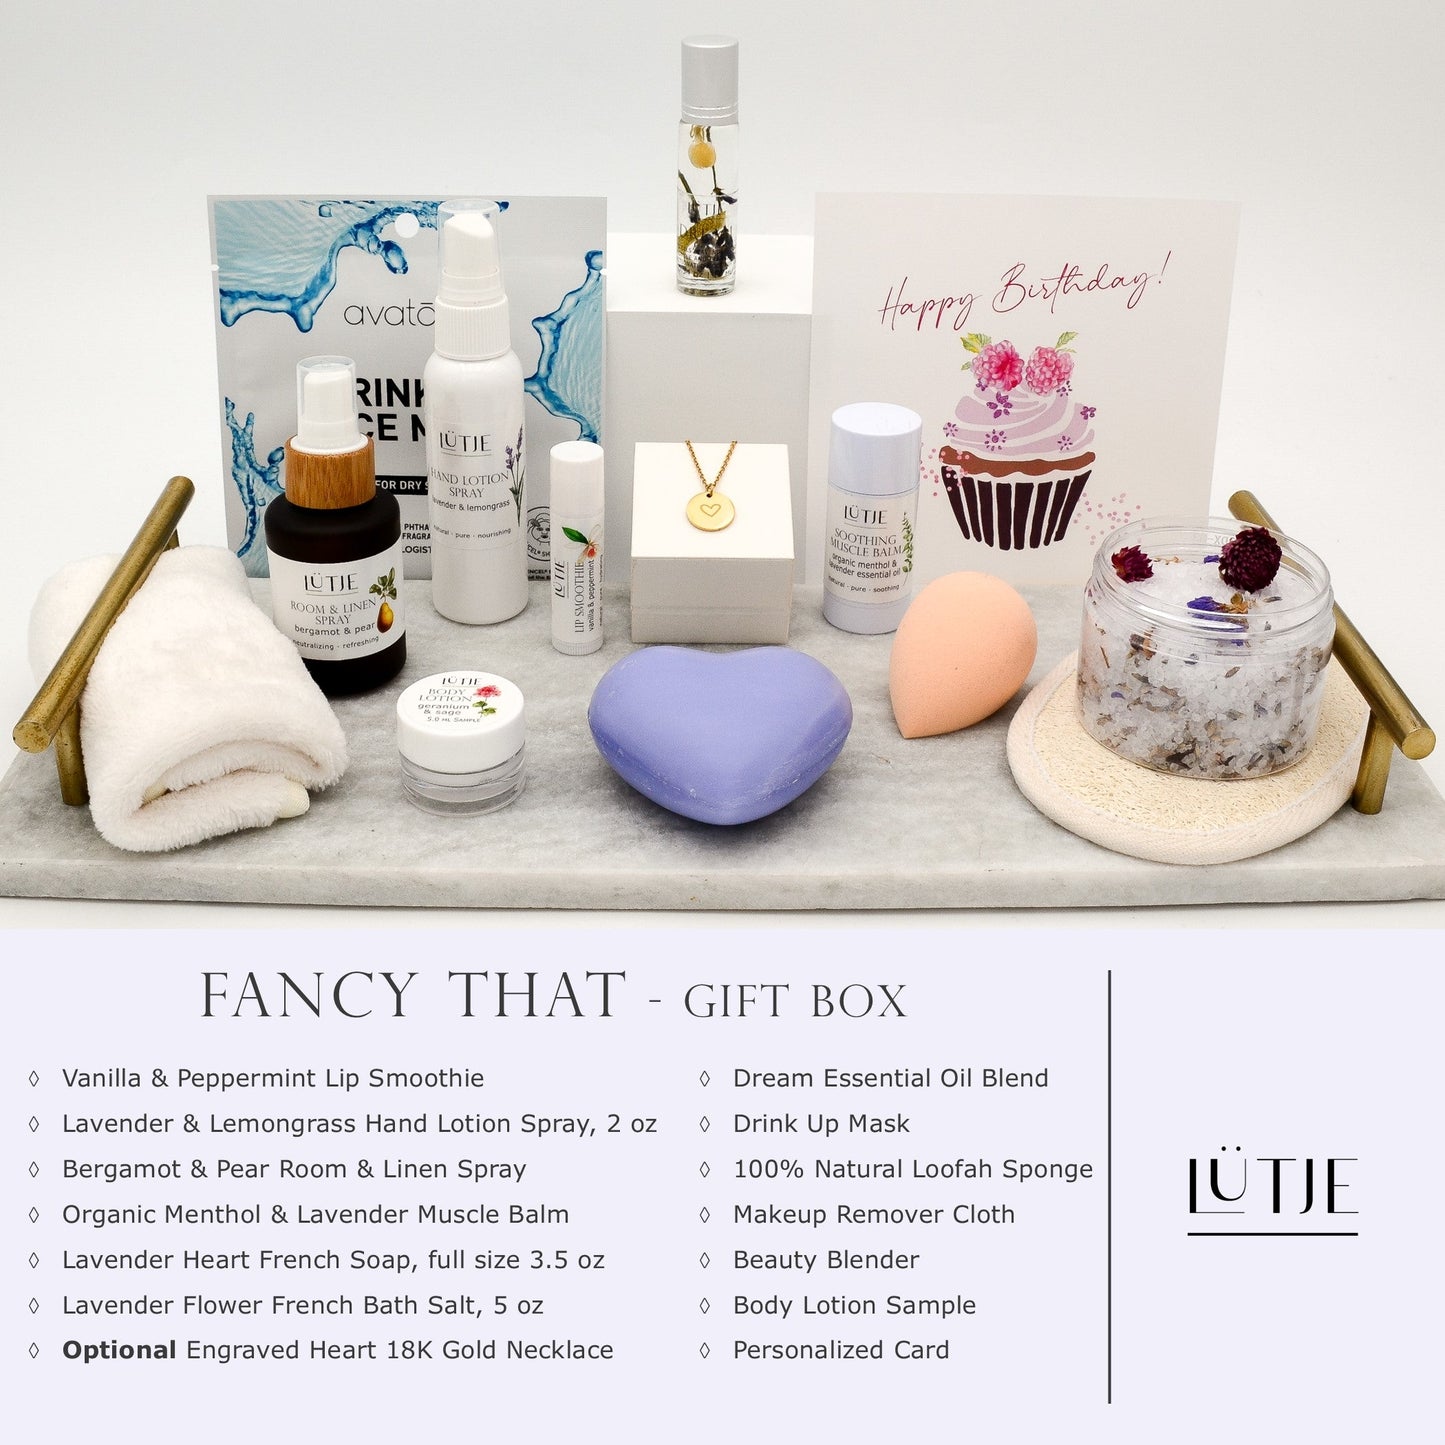 Fancy That Gift Box for women, BFF, wife, daughter, sister, mom, or grandma, includes Lavender & Lemongrass hand lotion spray, essential oil, lip balm, soothing muscle balm, Bergamot & Pear room & linen spray, French soap, French bath salts, hydrating face mask, other bath, spa and self-care items, and optional 18K gold-plated necklace with engraved heart.